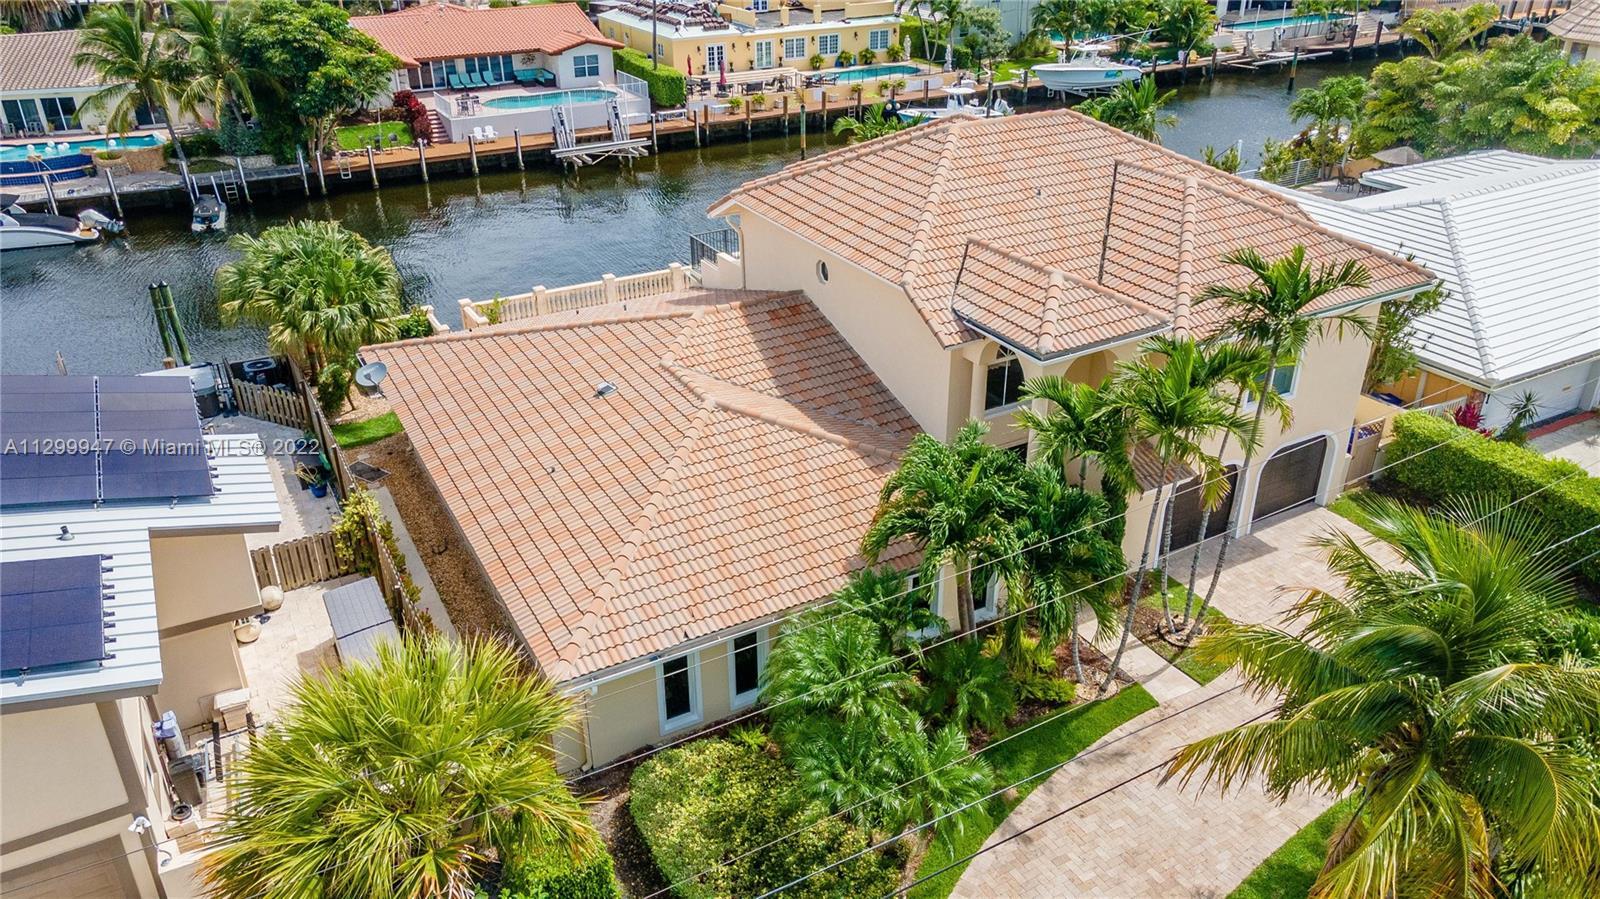 Salt Life Paradise! This waterfront pool home is tucked away in Fort Lauderdale Castle Harbor Isle w